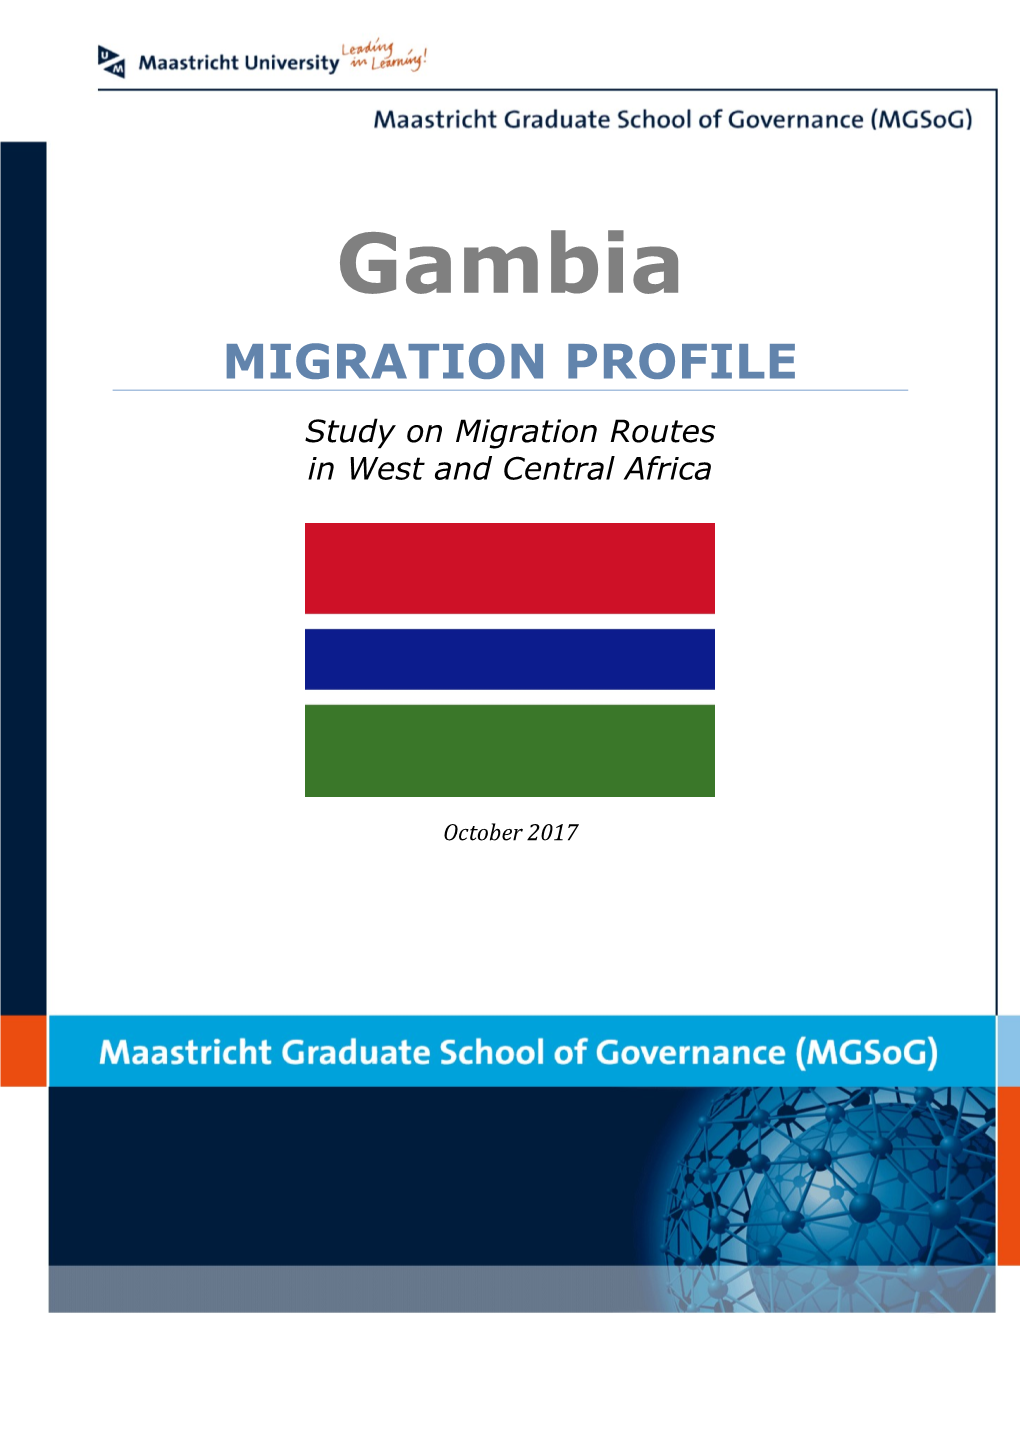 Gambia MIGRATION PROFILE Study on Migration Routes in West and Central Africa